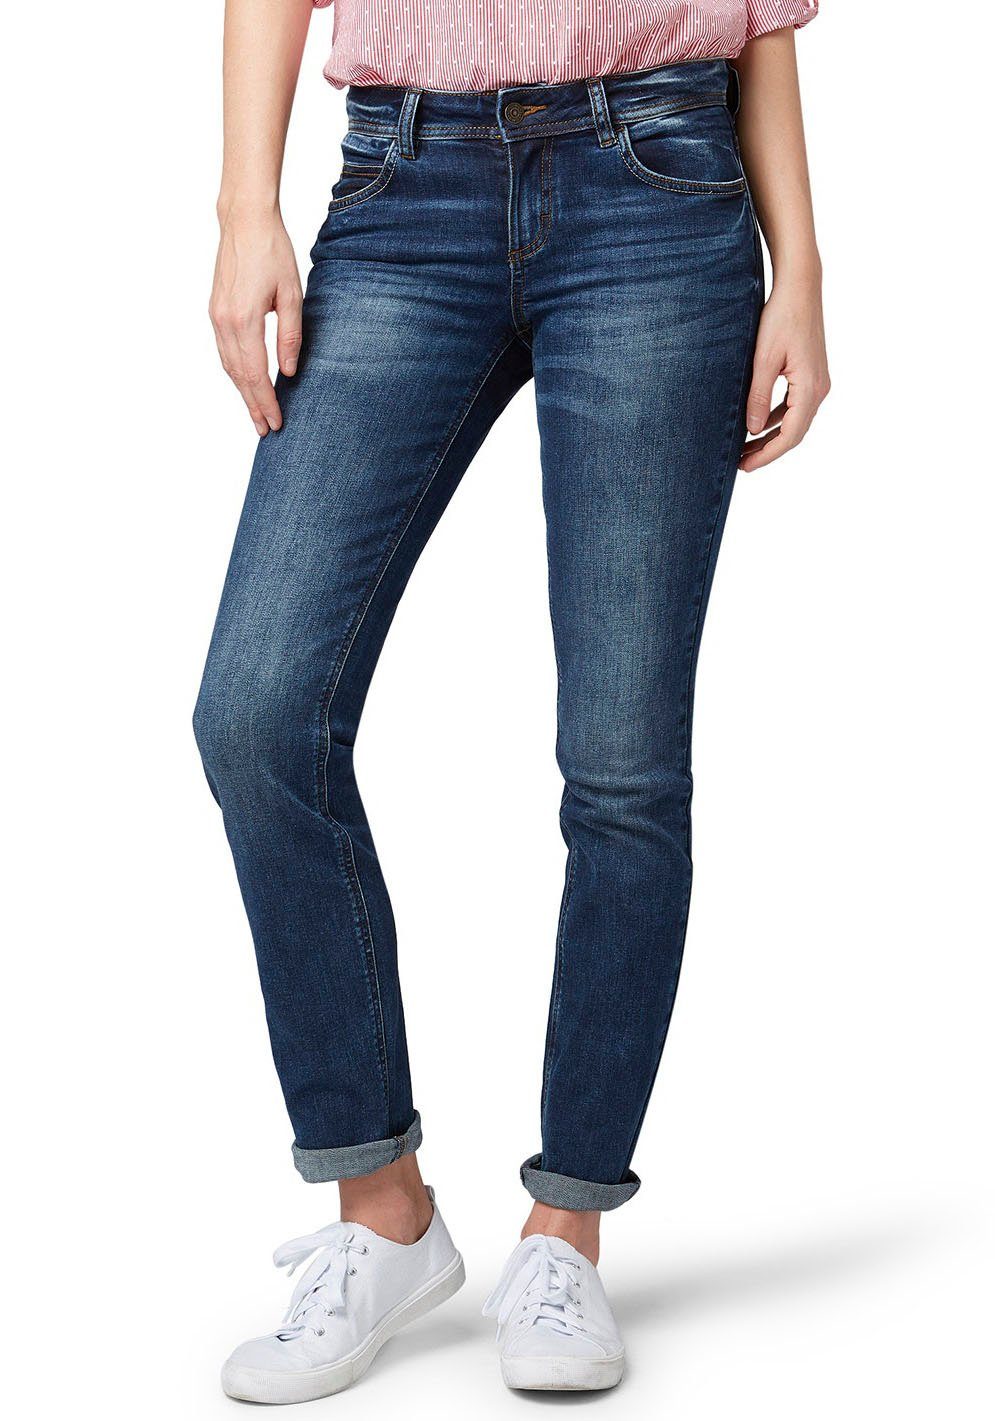 Tom Tailor straight jeans